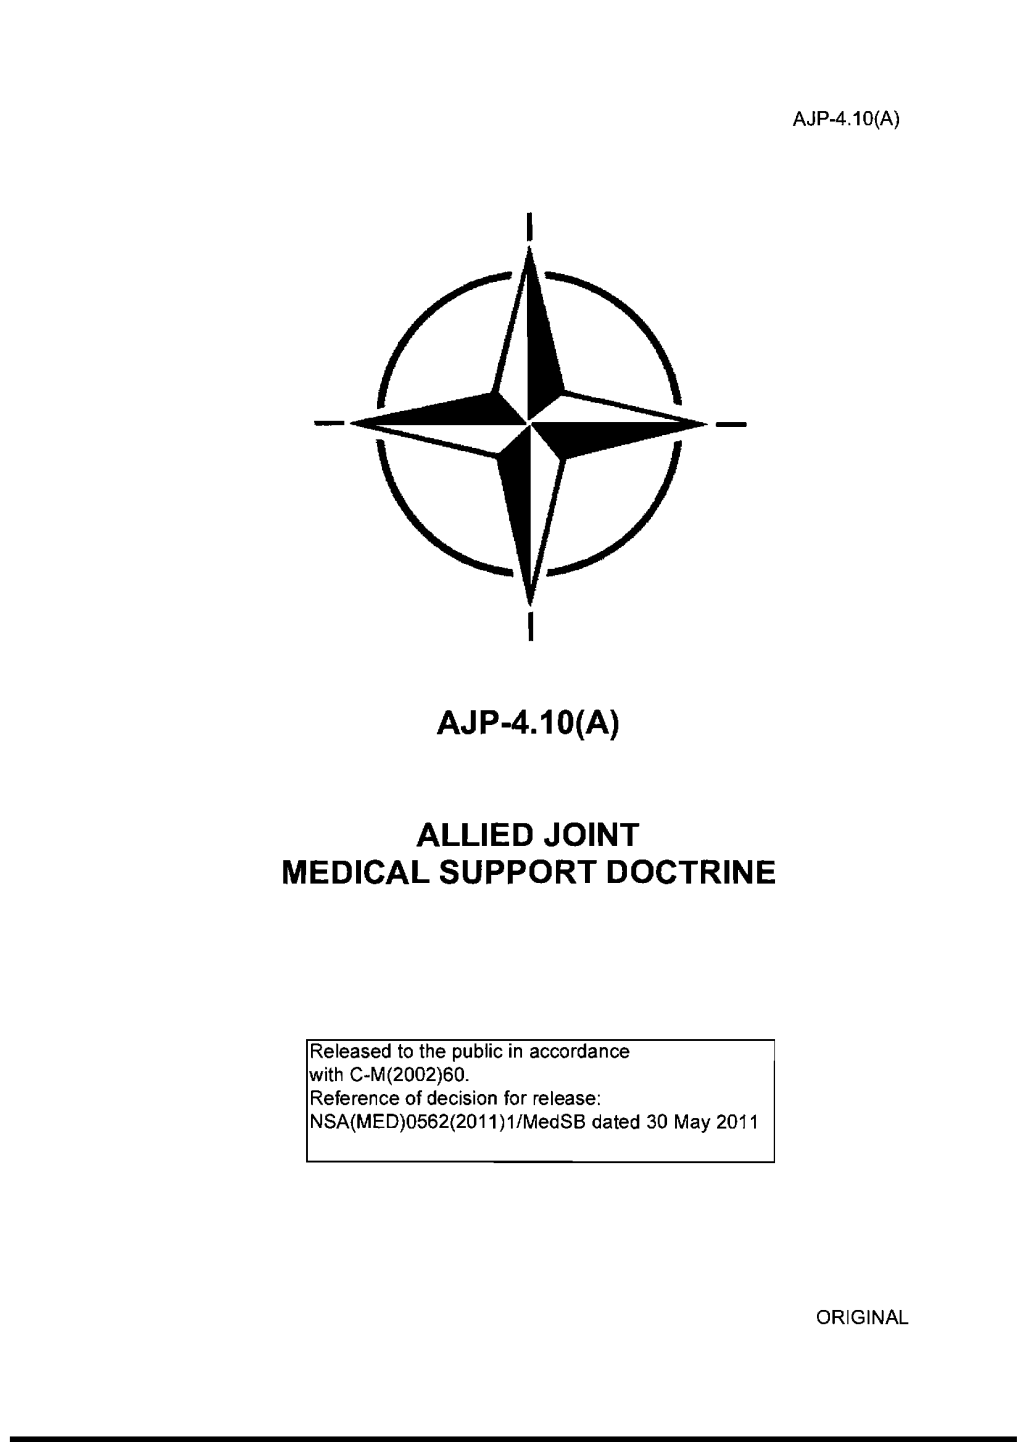 Allied Joint Medical Support Doctrine